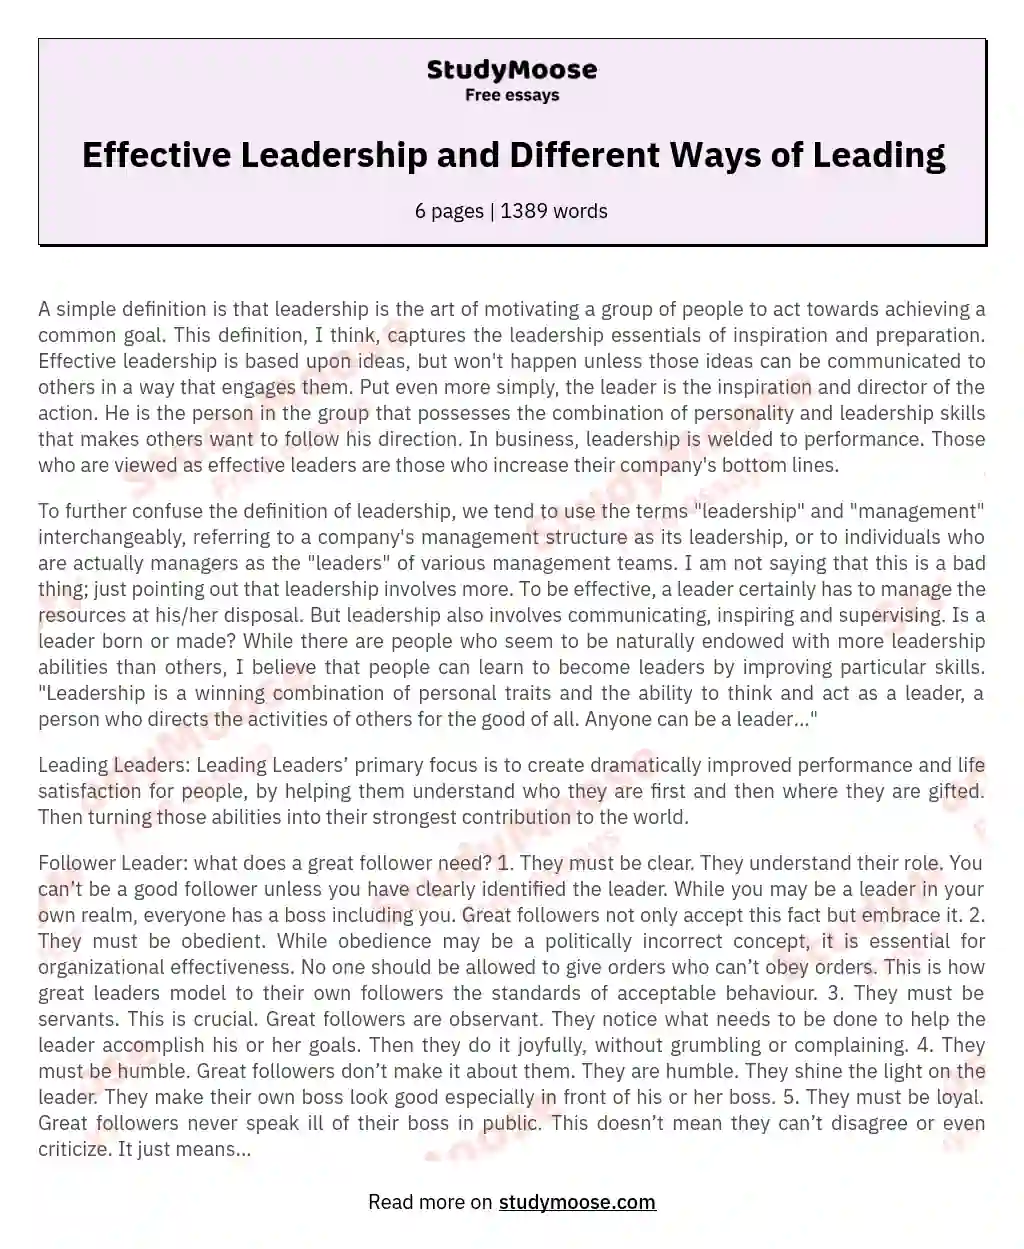 Effective Leadership and Different Ways of Leading essay